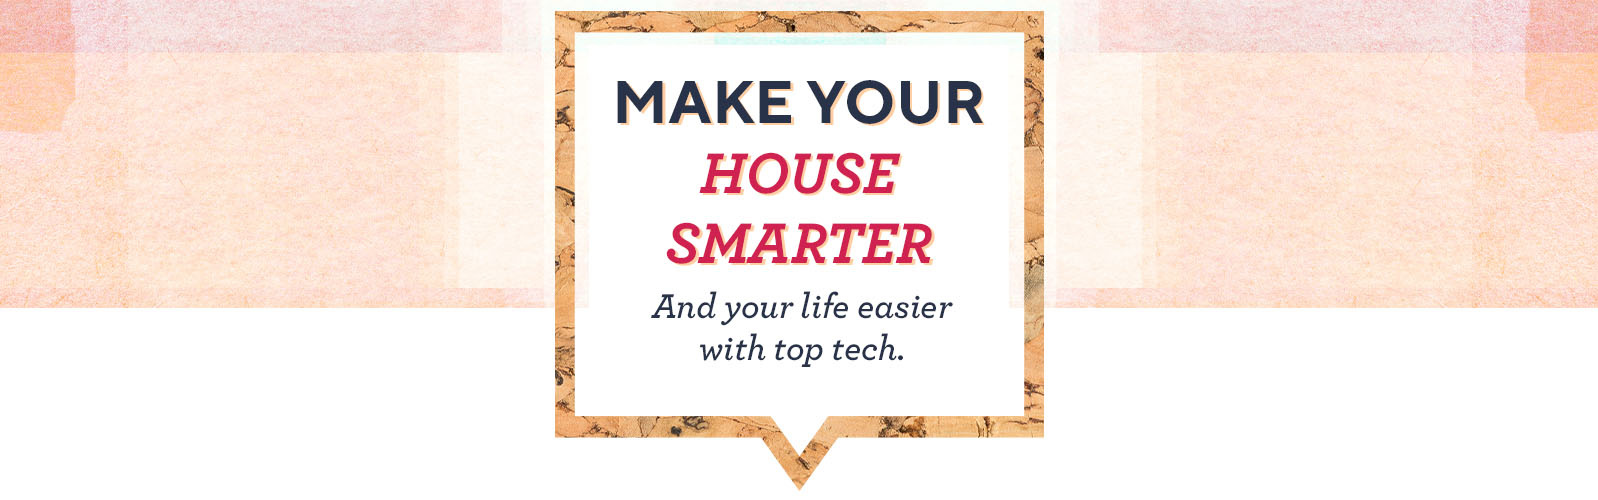 Make Your House Smarter  And your life easier with top tech. 